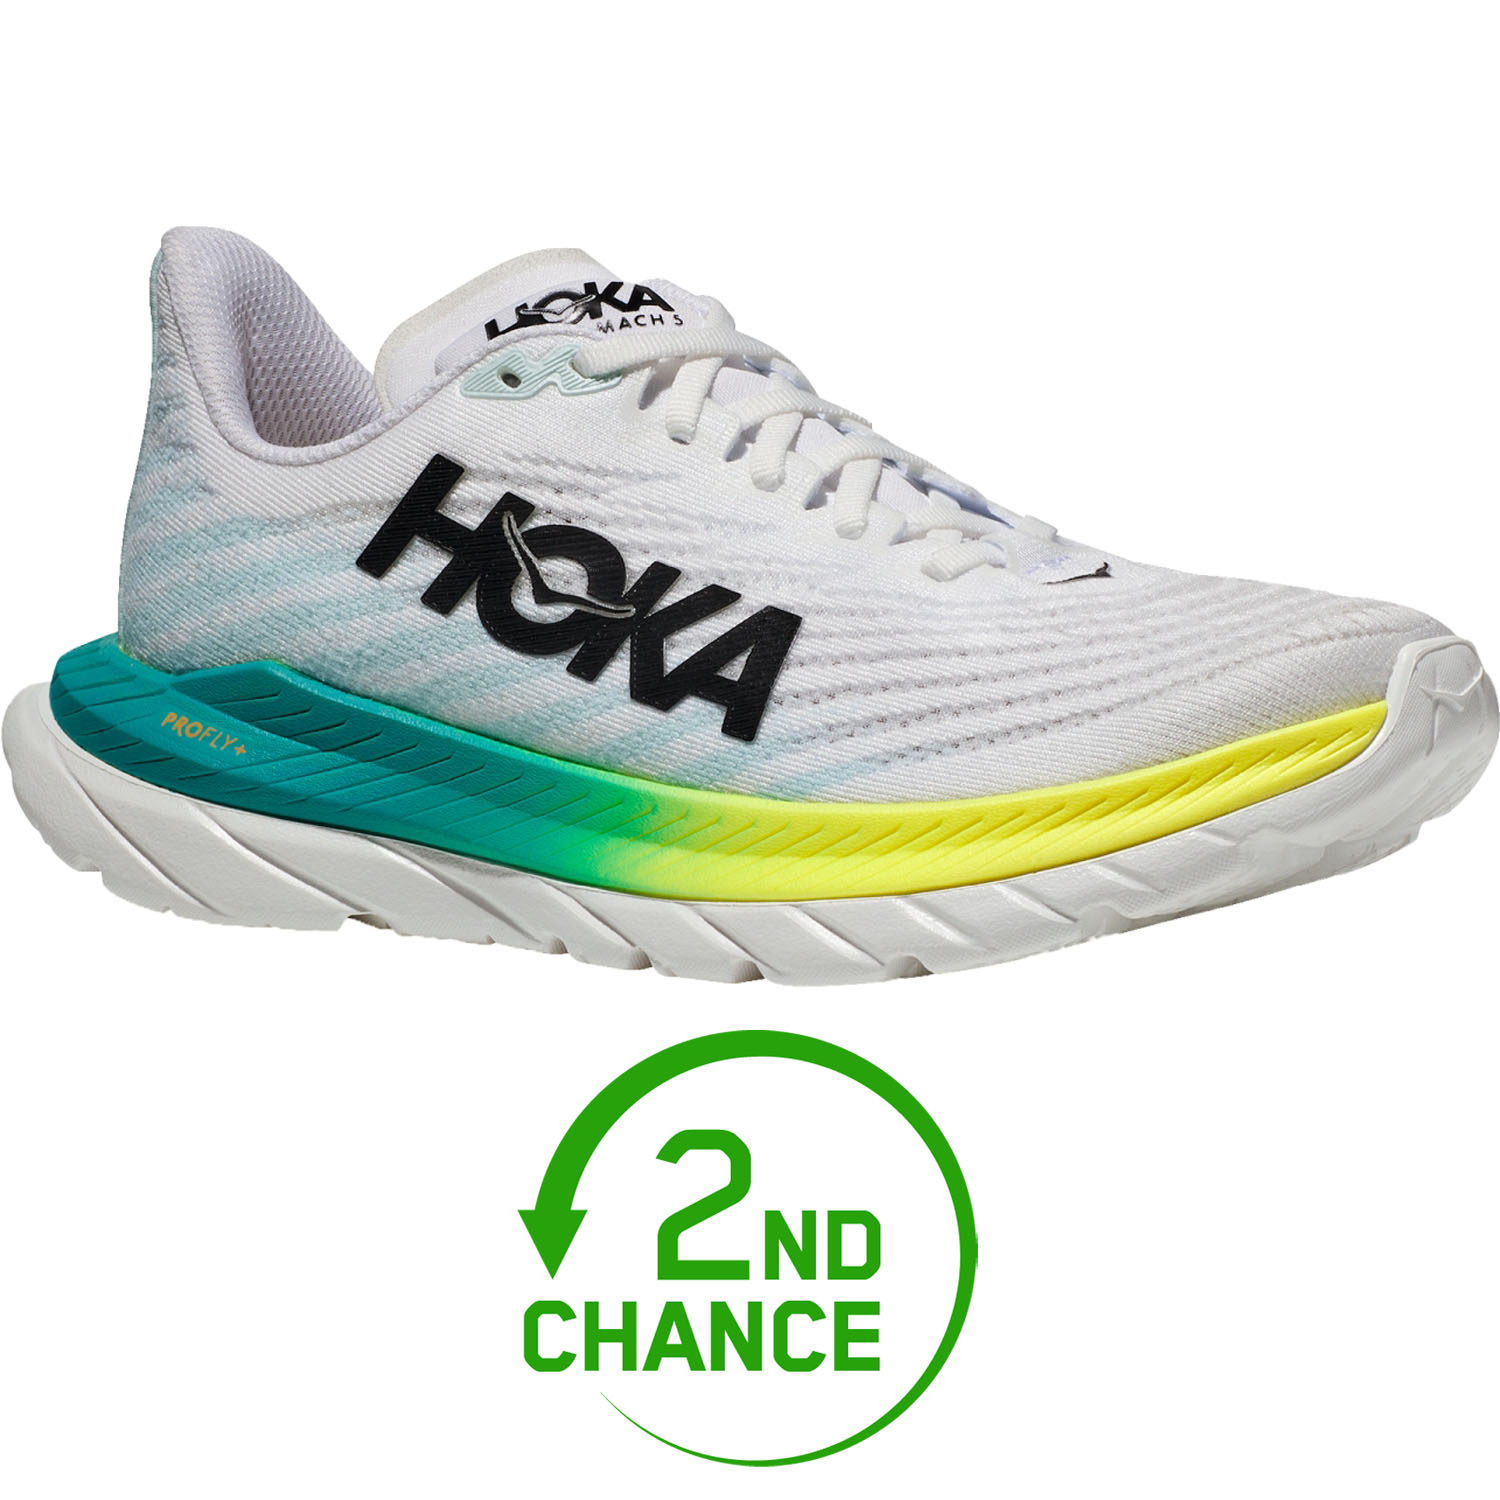 Picture of Hoka Mach 5 Running Shoes Women - white / blue glass - 2nd Choice